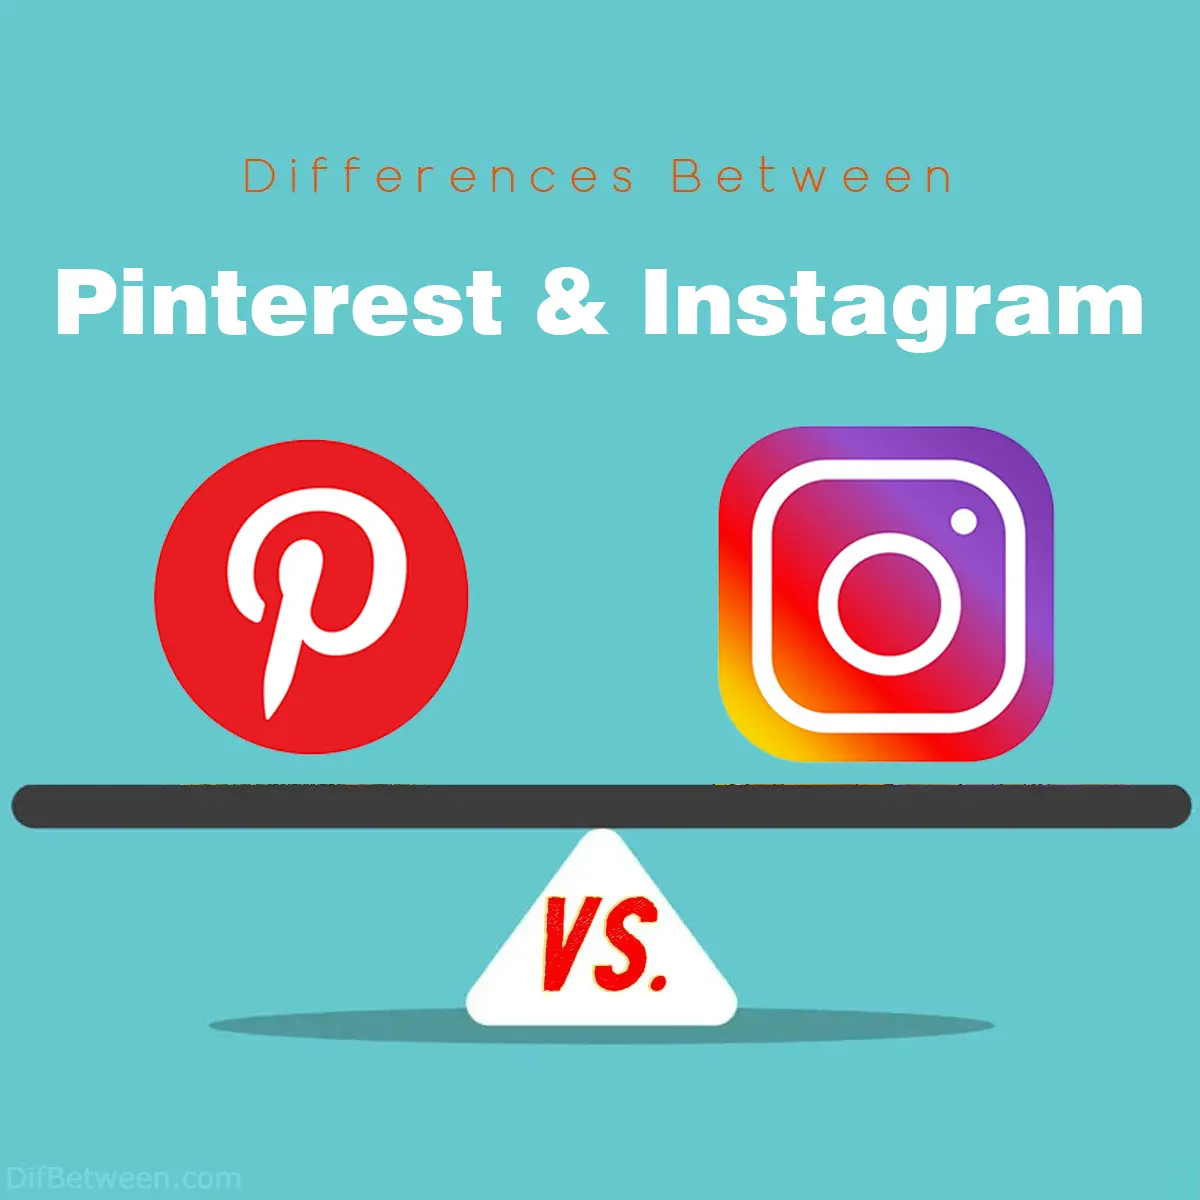 Differences Between Pinterest and Instagram